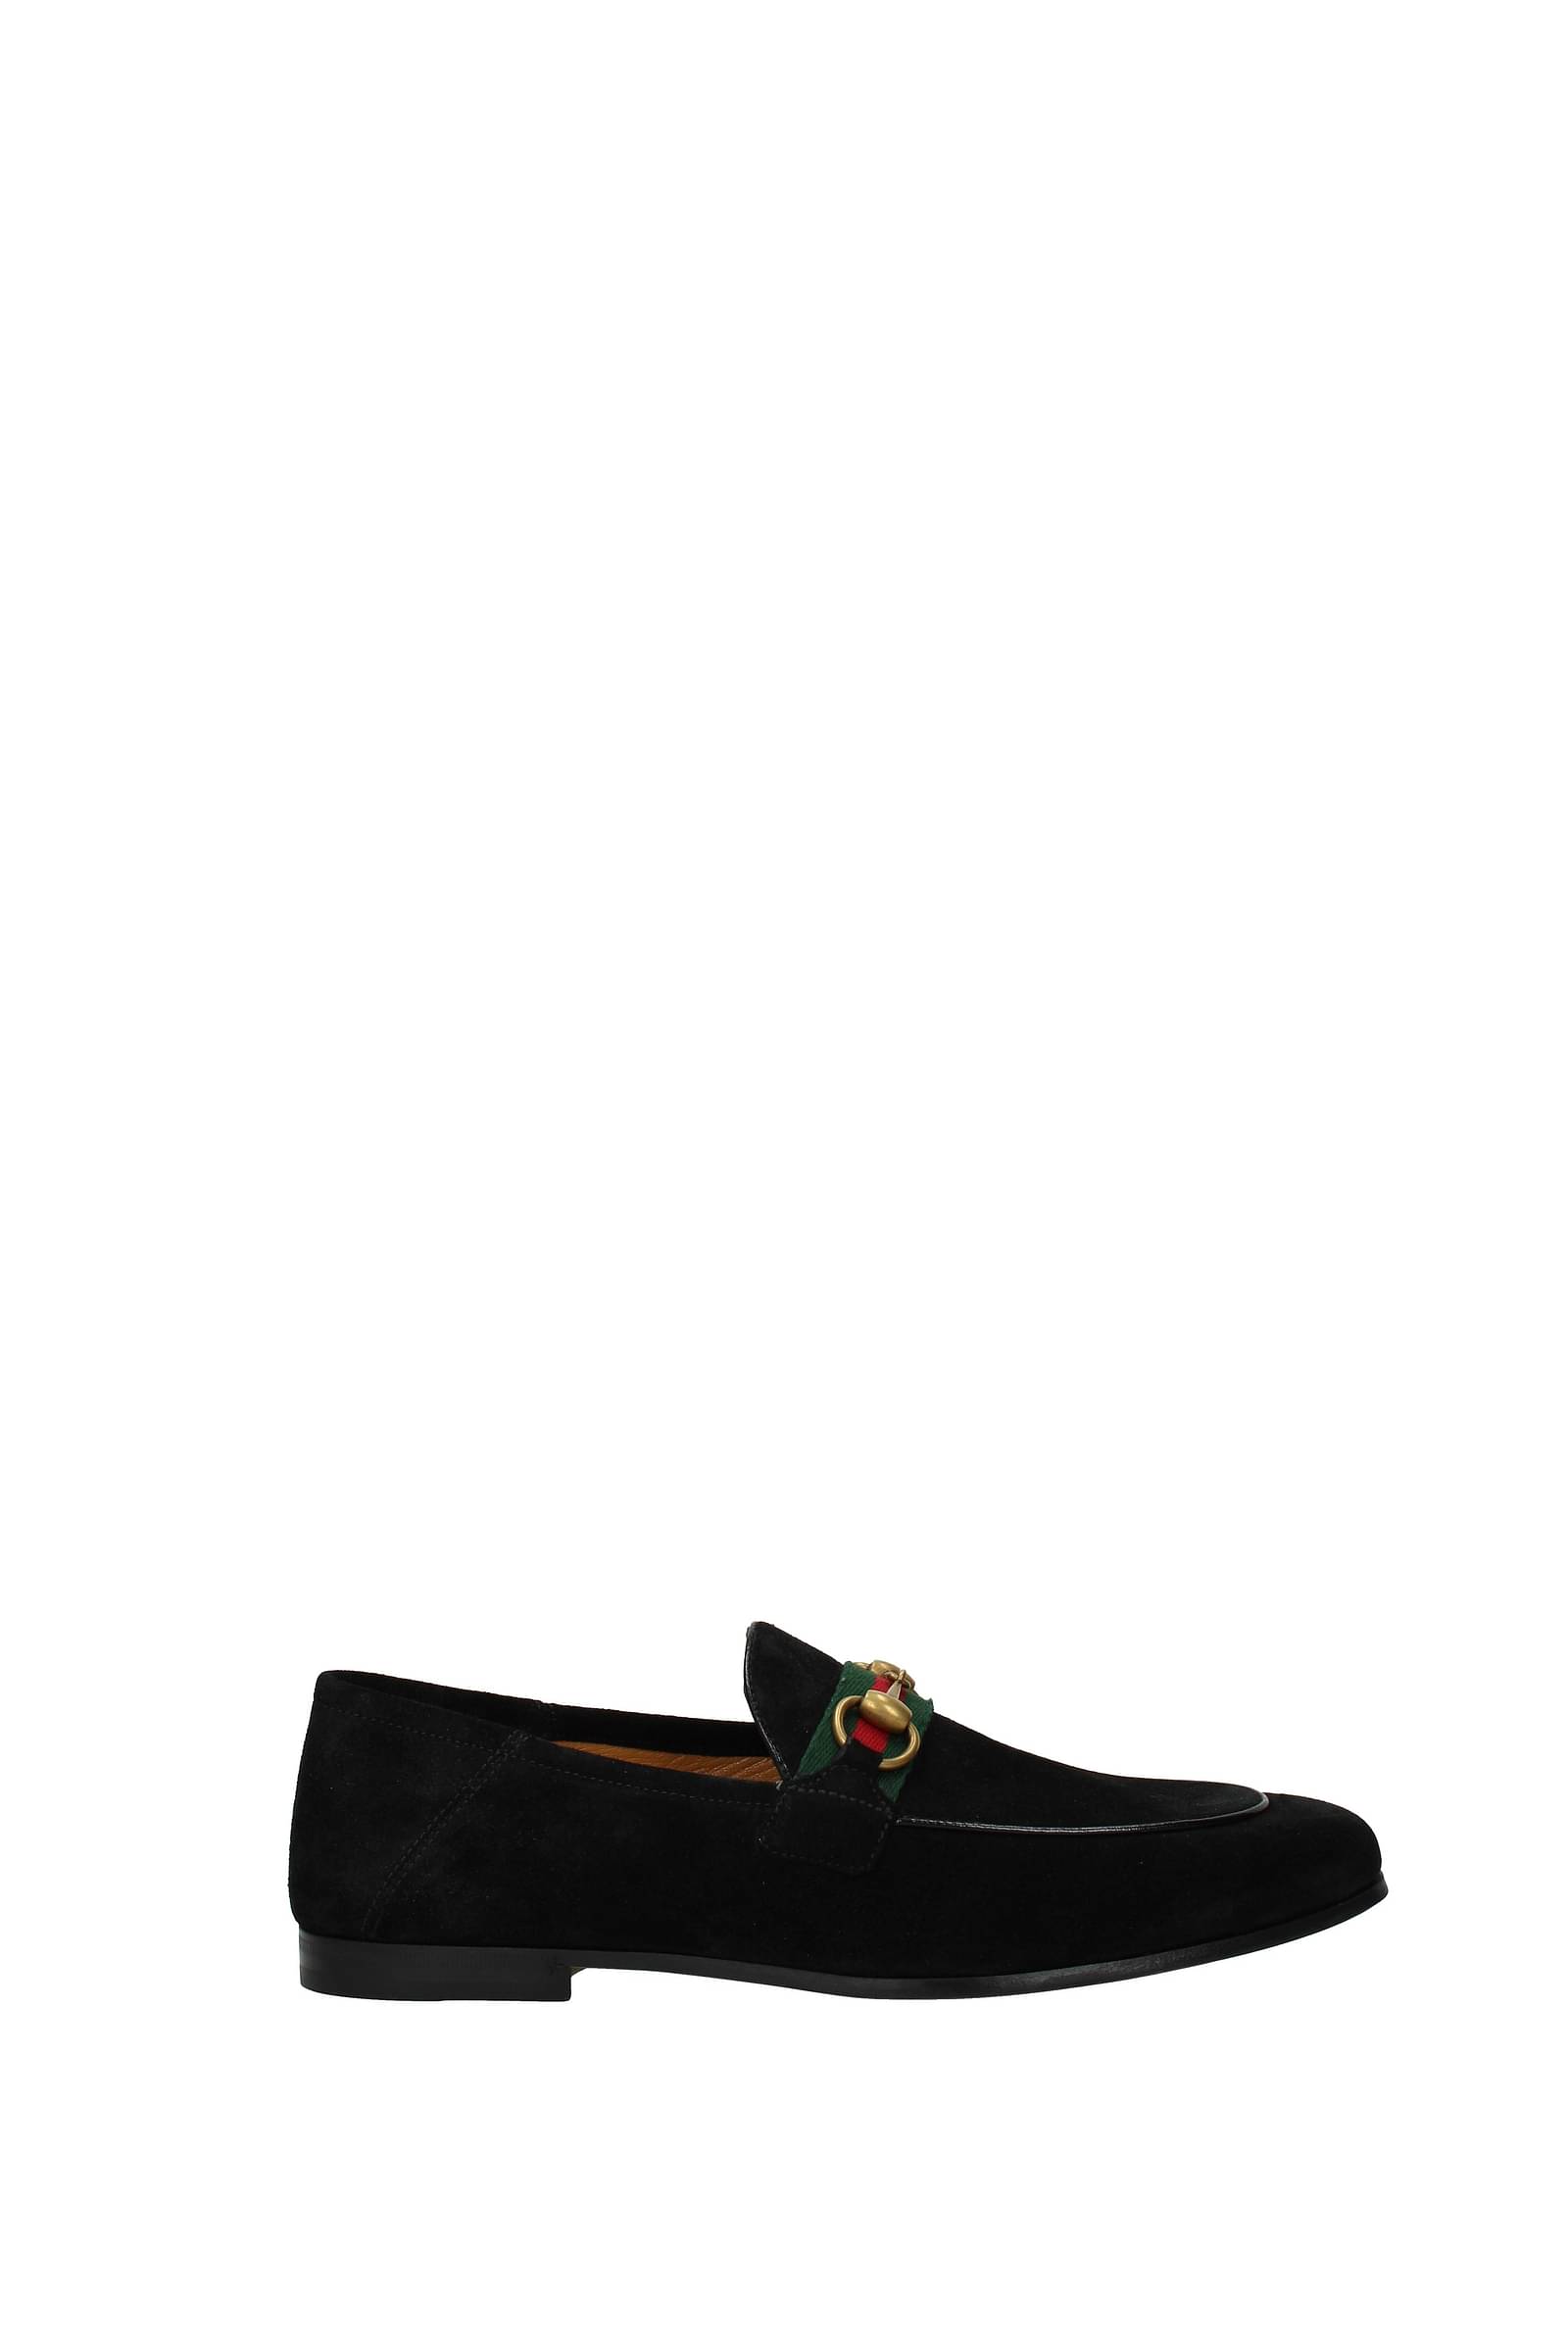 loafers offers